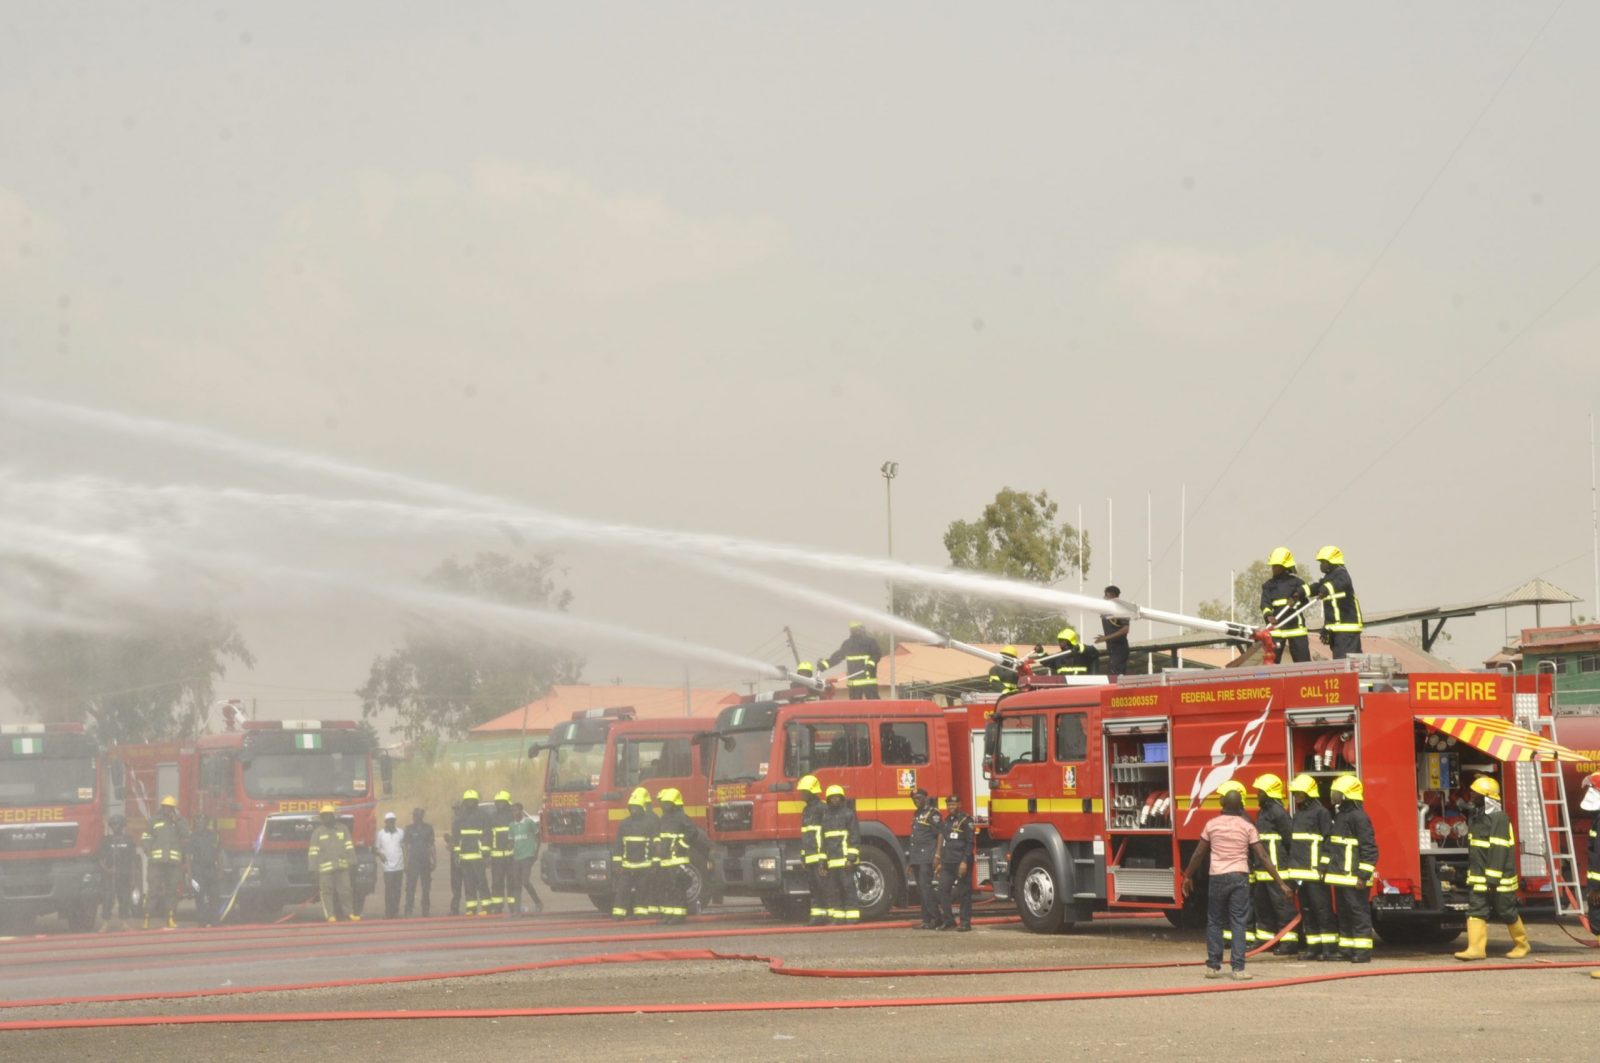 kaduna, FEDERAL FIRE SERVICE collapsed tanker theatre